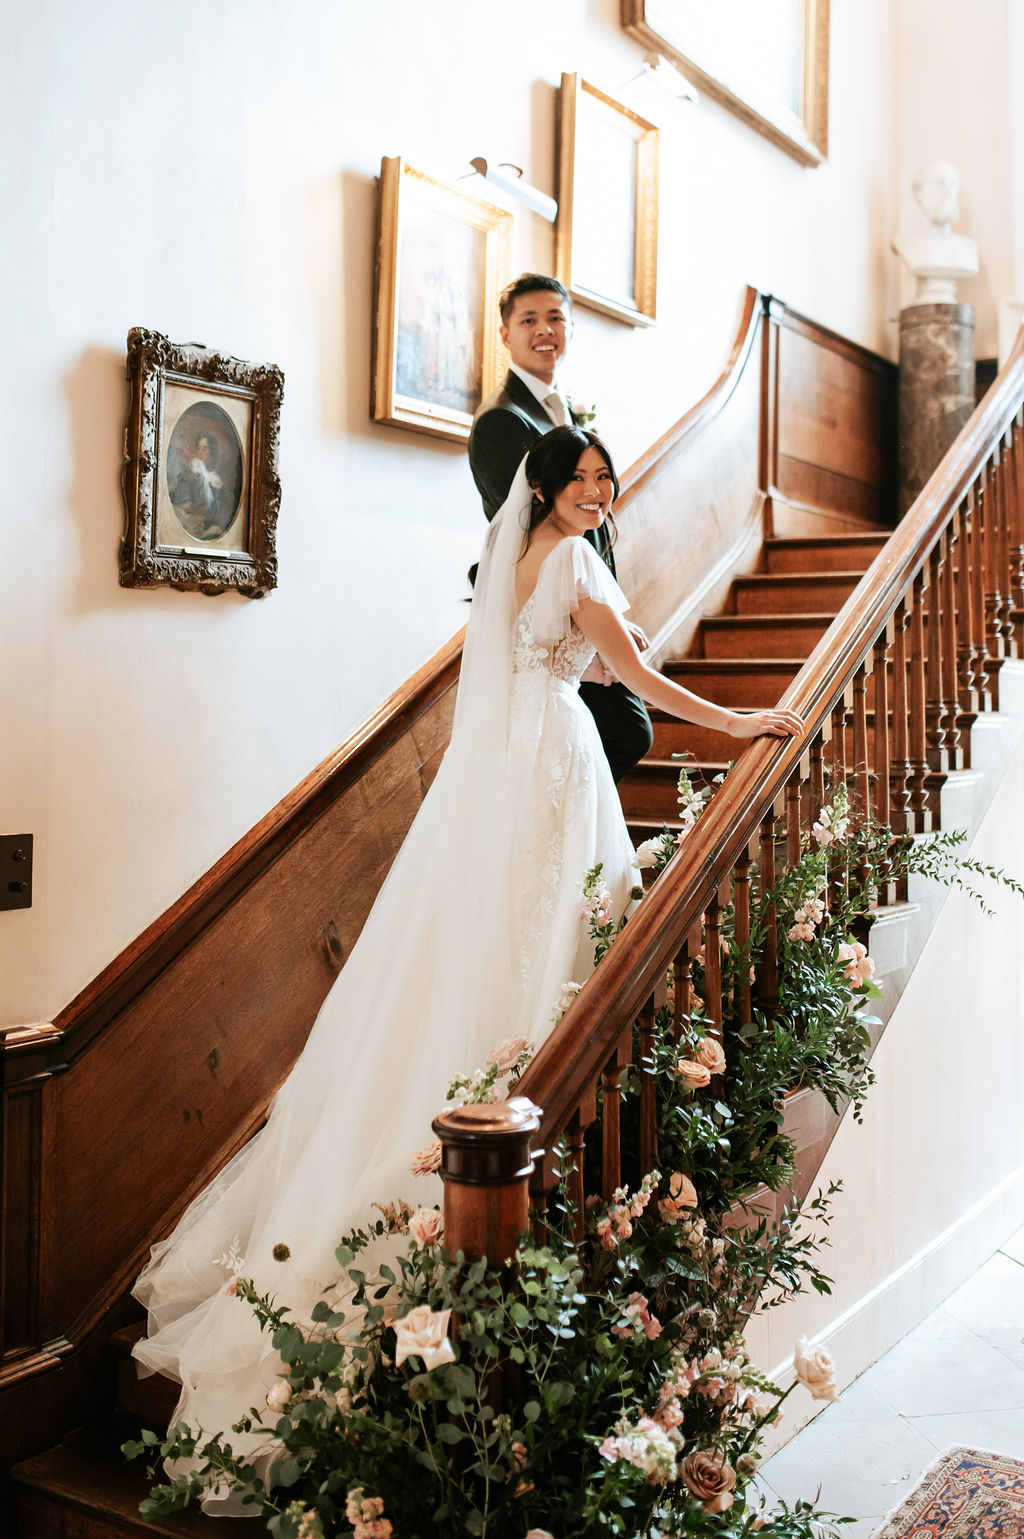 A bride in a white wedding dress and long veil walks up an antique wooden staircase that has candles arranged at the bottom and white and green flowers entwined around the bannister